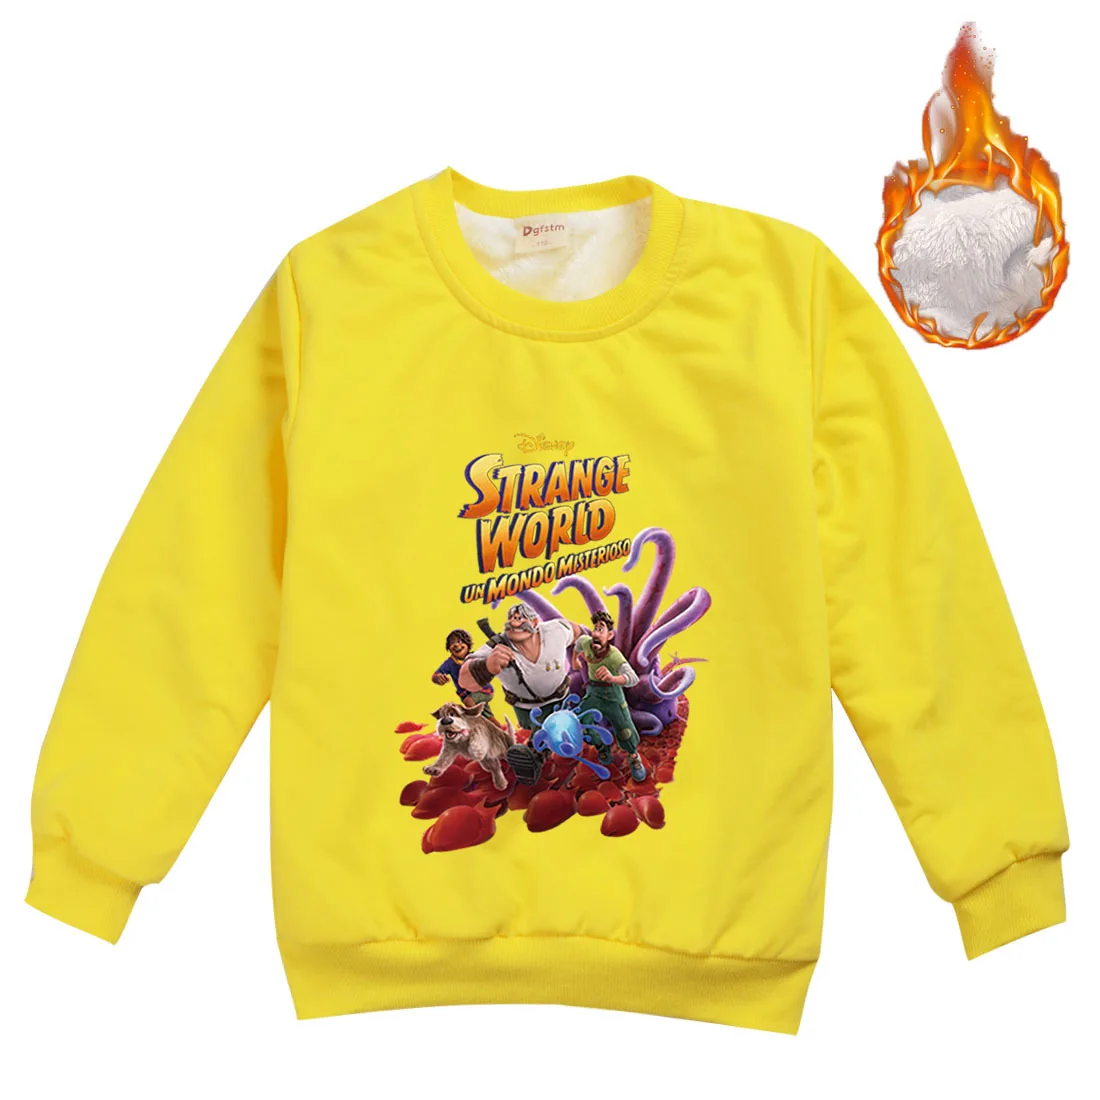 Strange World Disney Movie Cartoon Print Sweater Tops Boys and Girls Children's Casual Winter Trendy Pullover Tops Kids Clothes